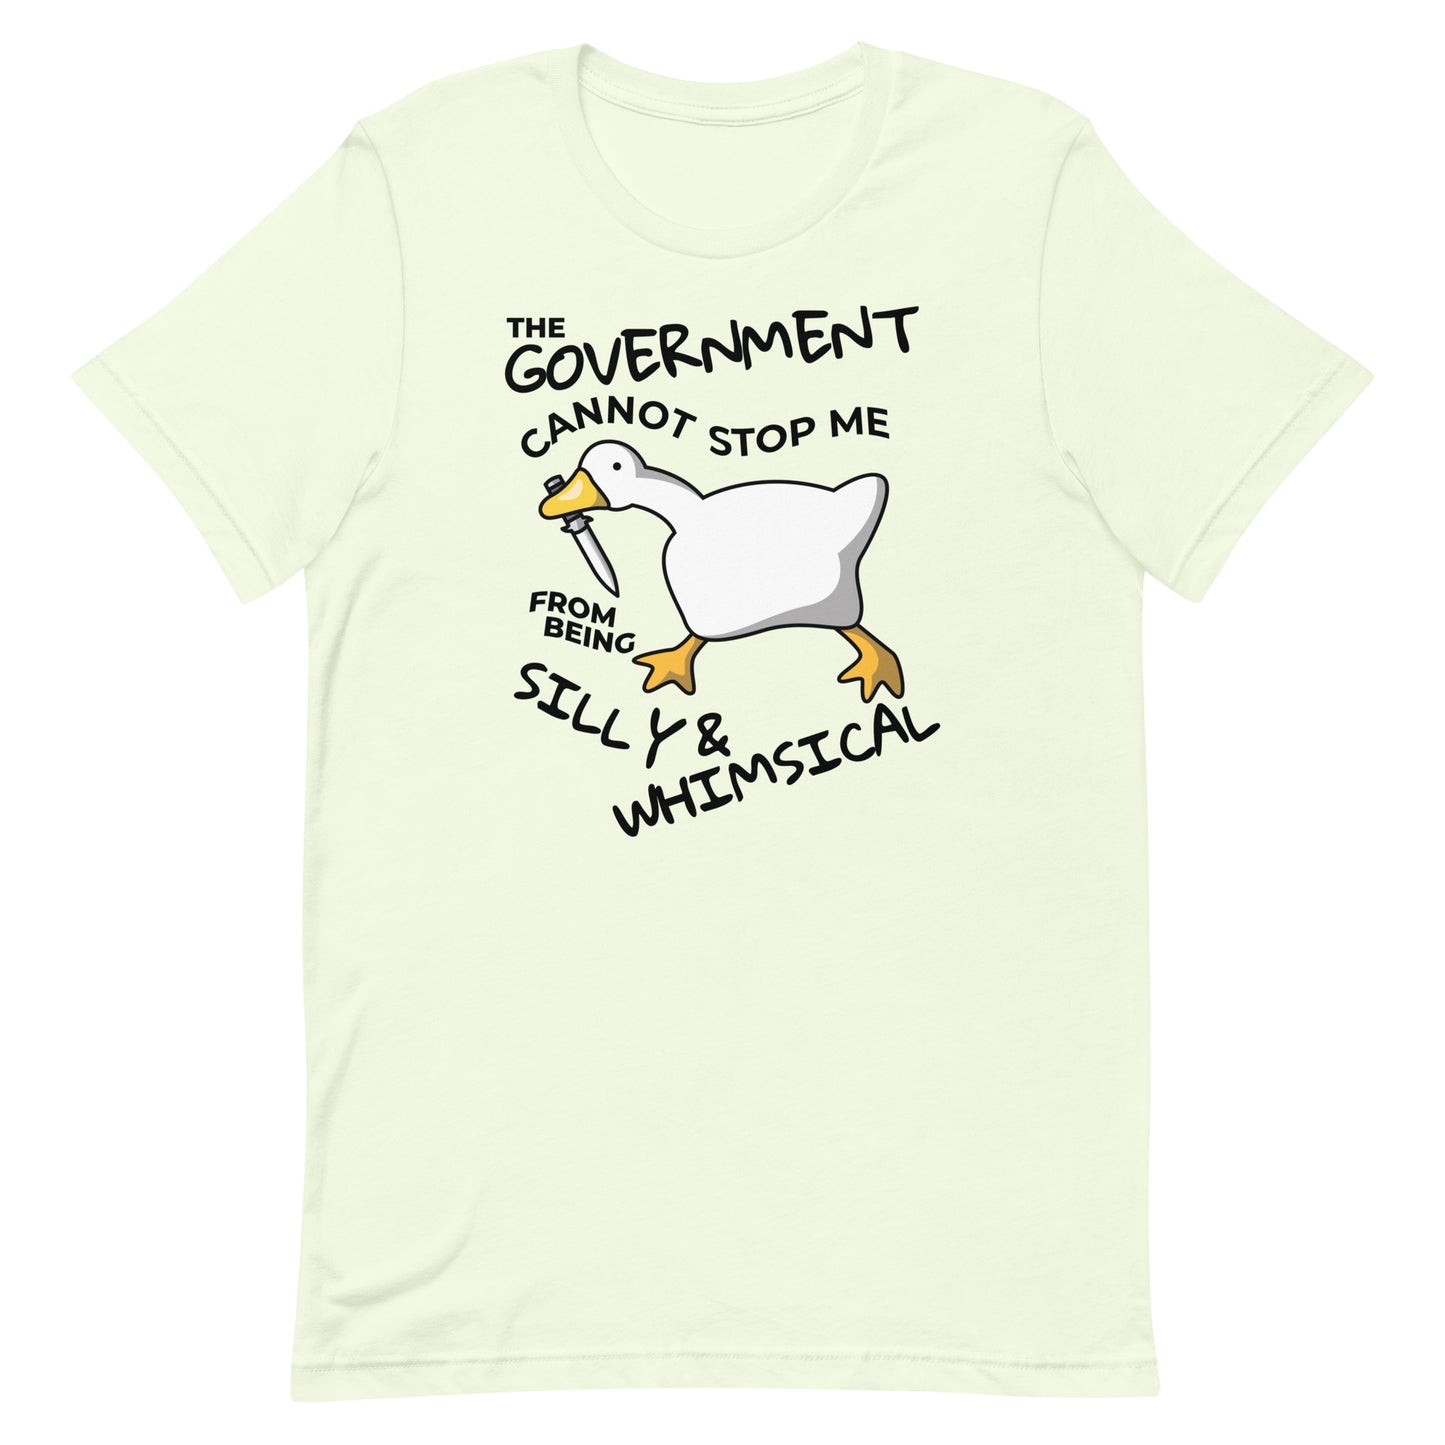 The Government Cannot Stop Me From Being Silly & Whimsical Unisex t-shirt